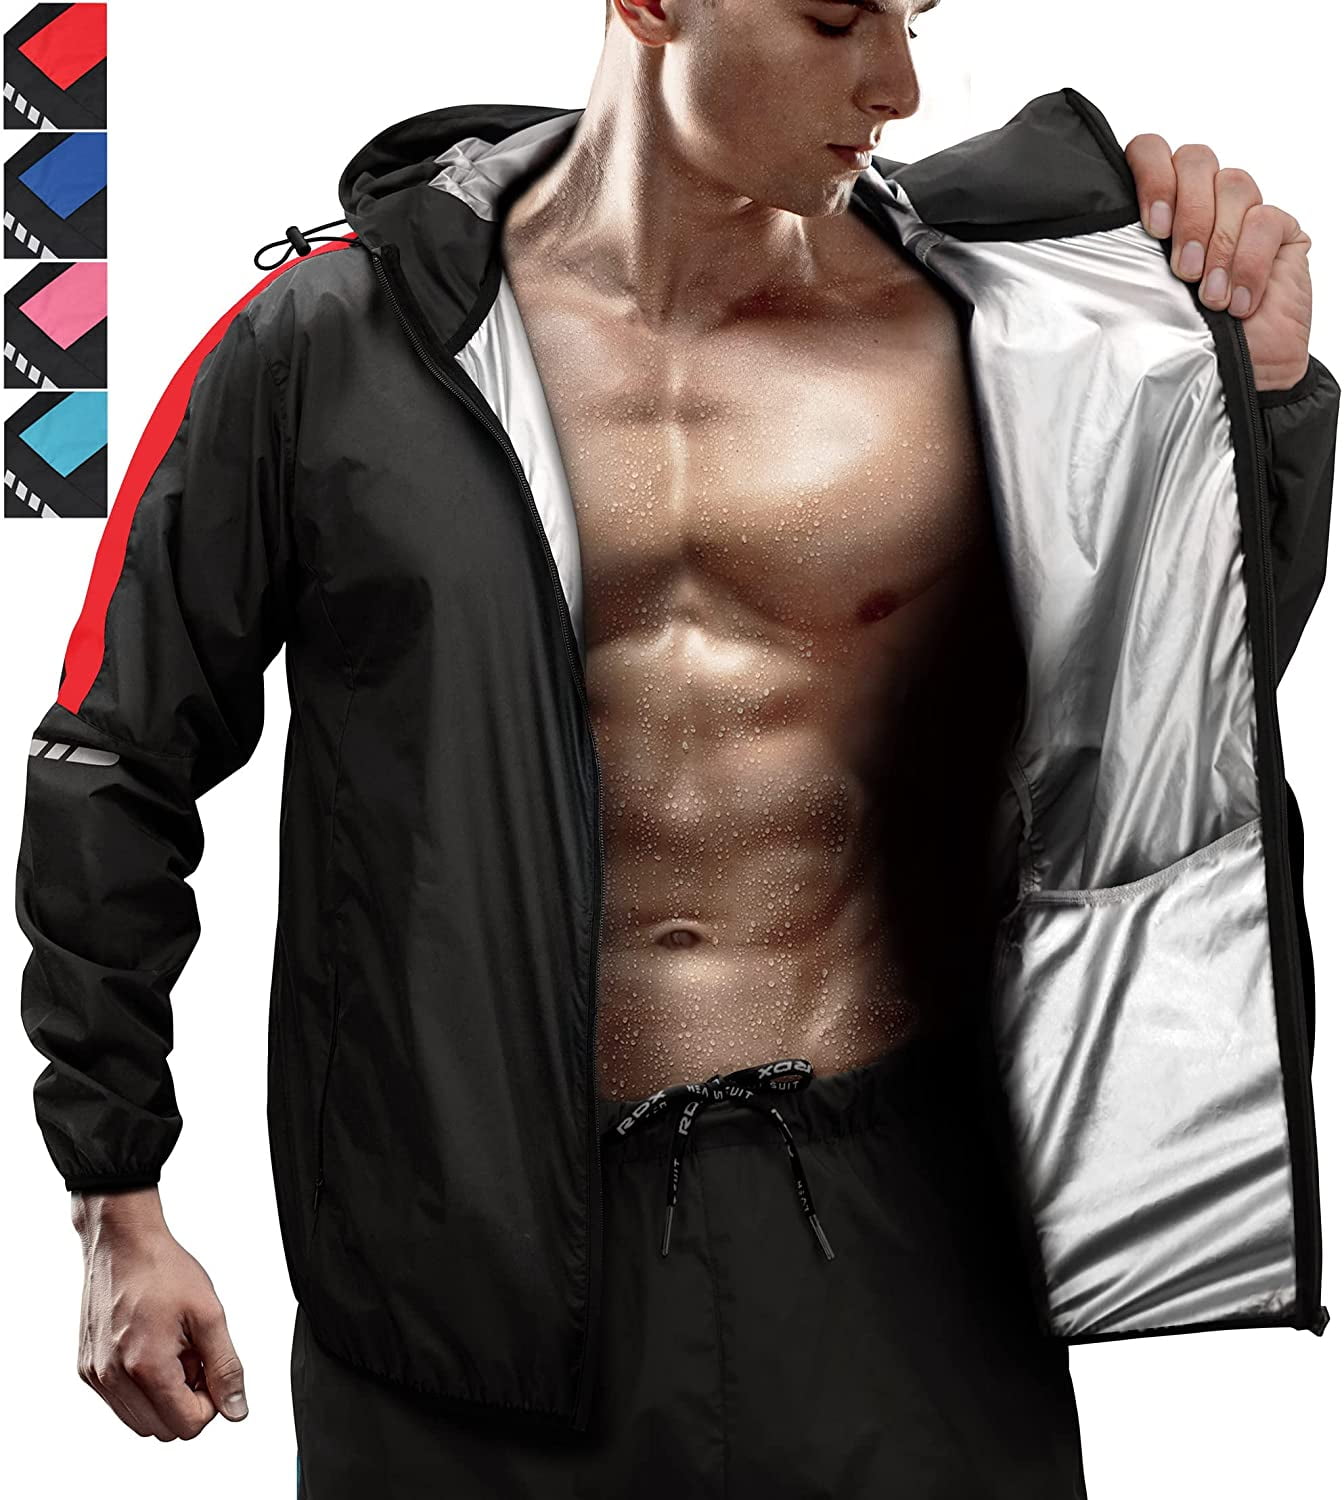 Much better】Explosive fitness suit slimming suit Explosion Sweat